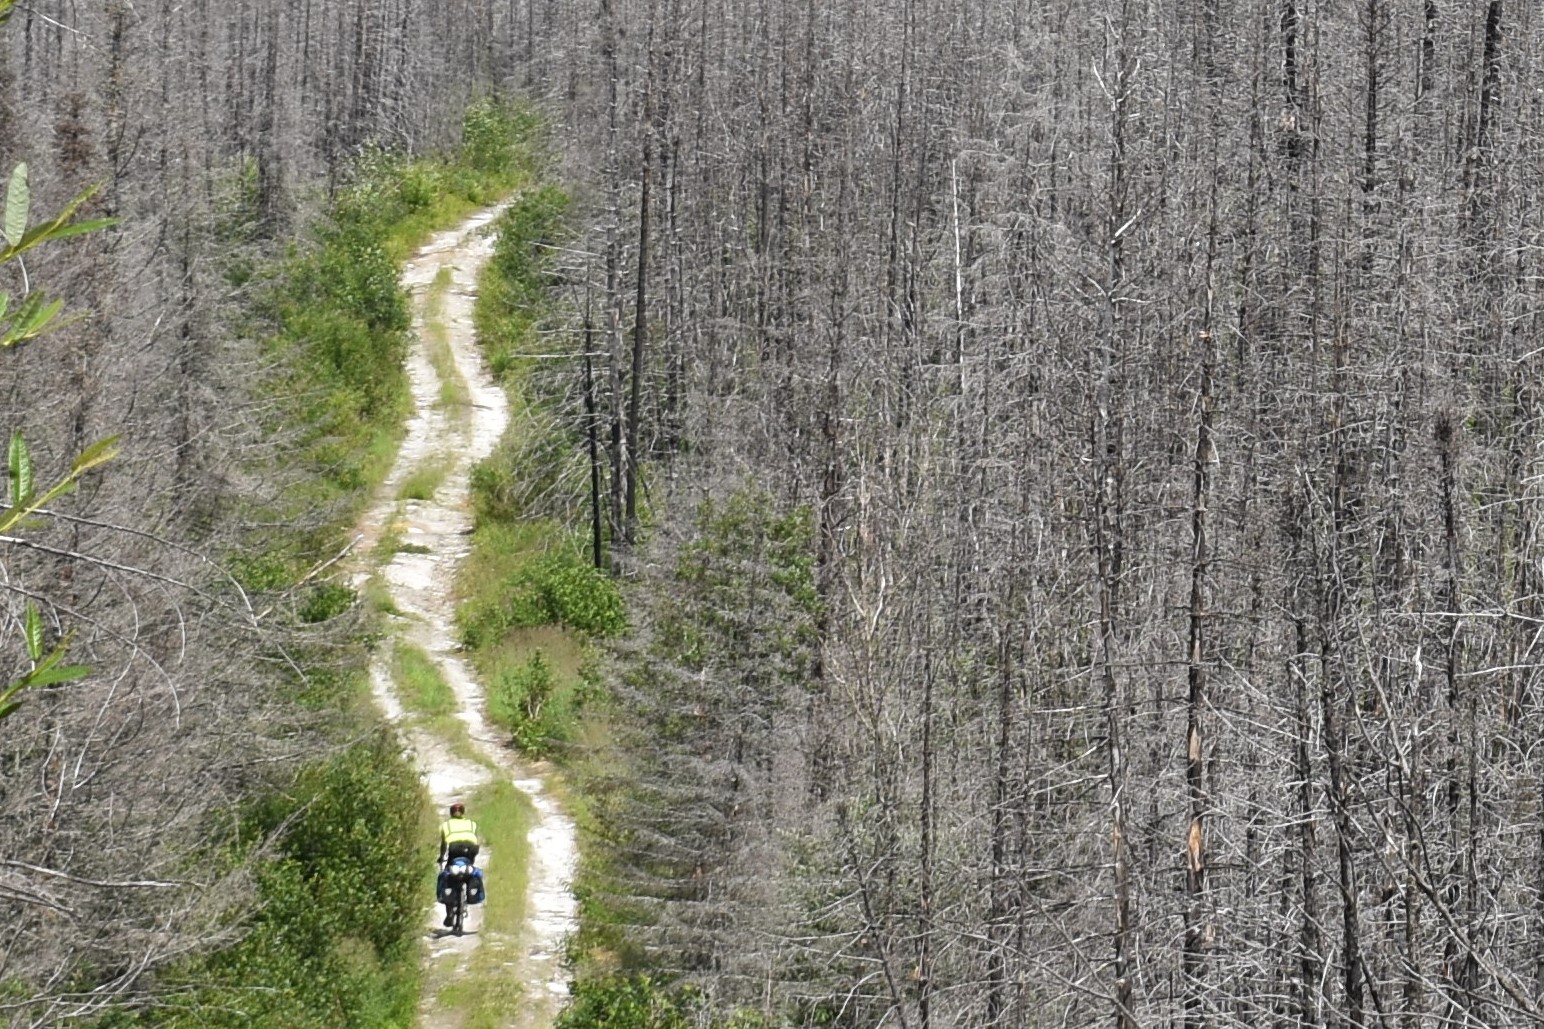 A person on a loaded bicycle goes up a dirt path between trees